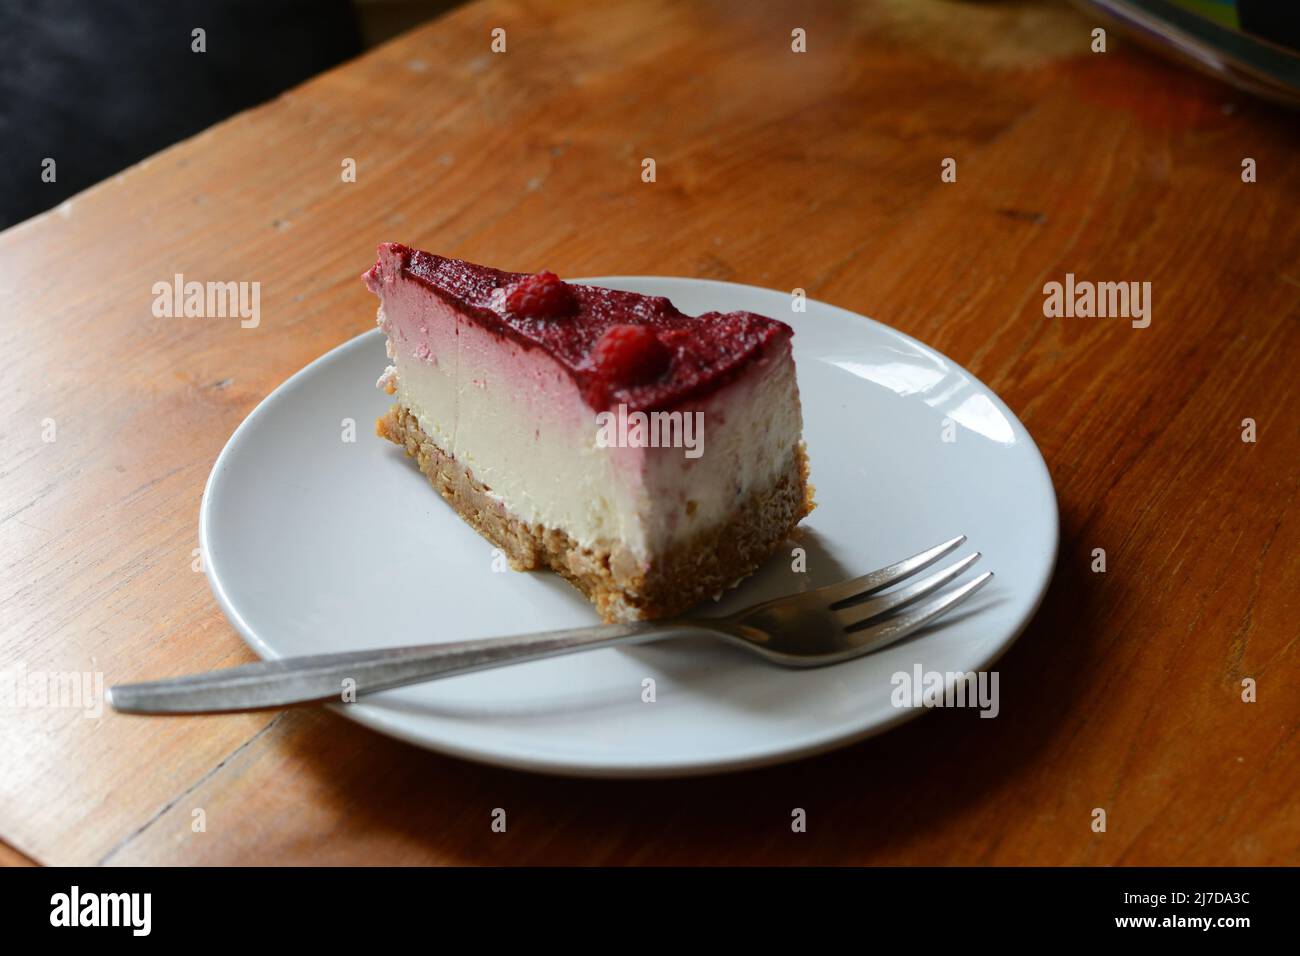 Cheesecake aux framboises Banque D'Images